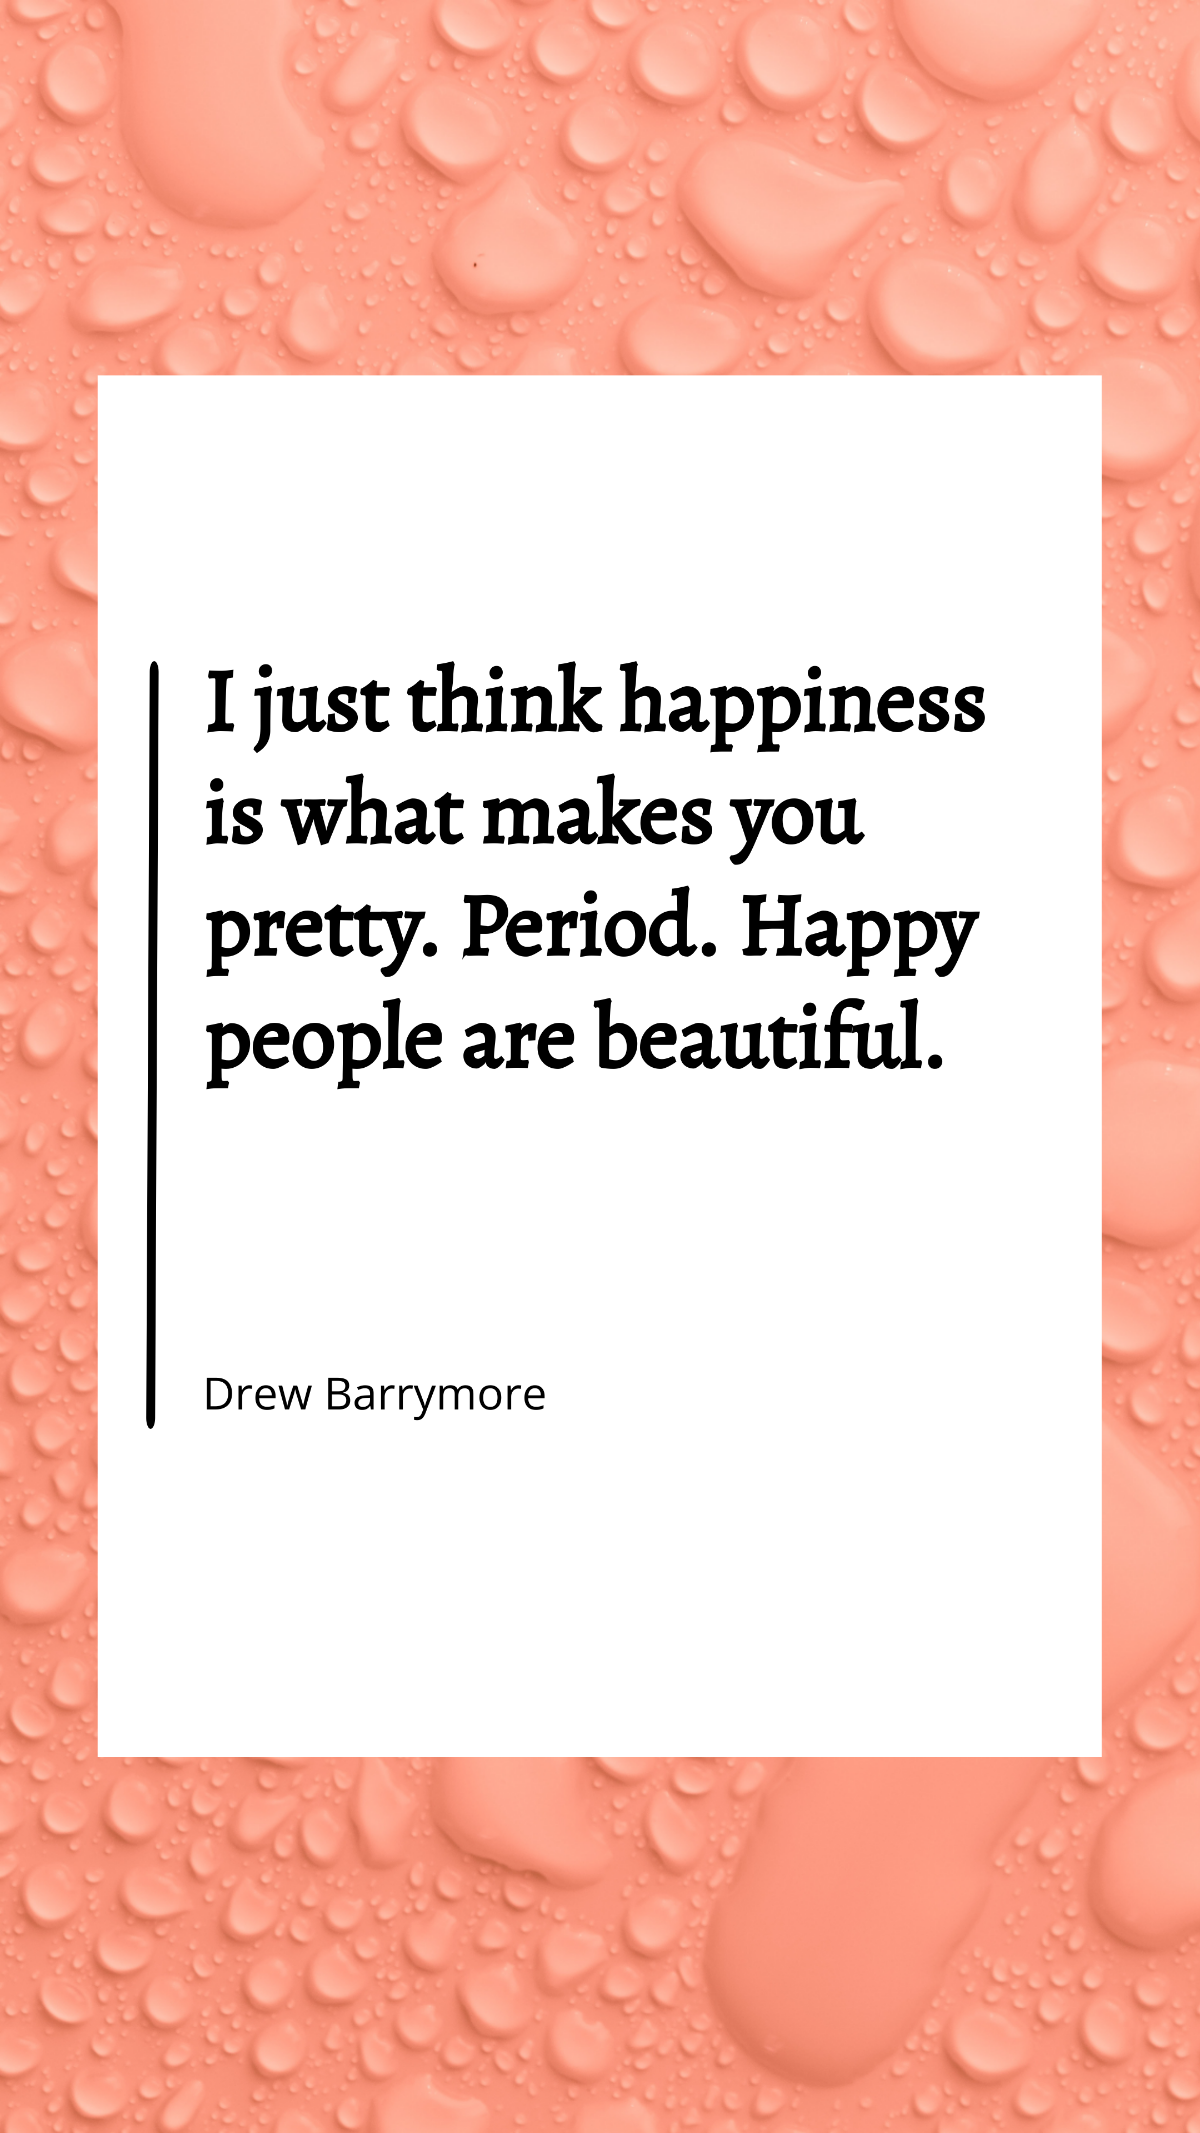 Drew Barrymore - I just think happiness is what makes you pretty. Period. Happy people are beautiful.